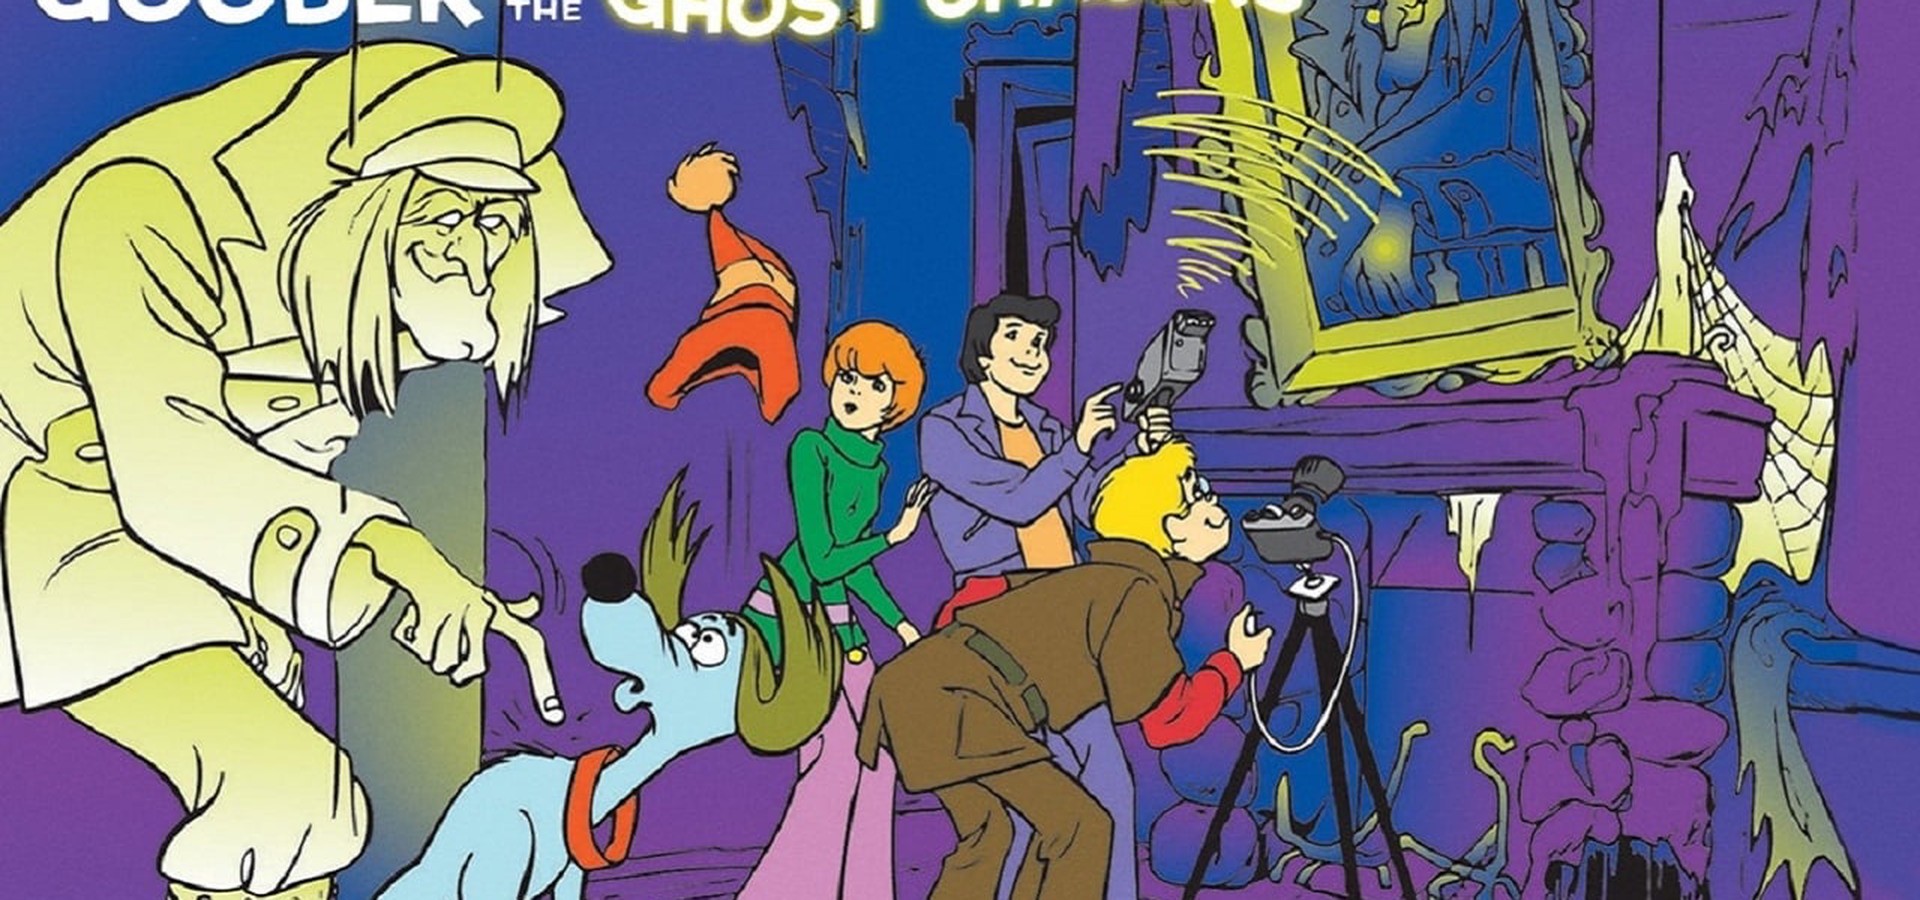 Goober and the ghost chasers